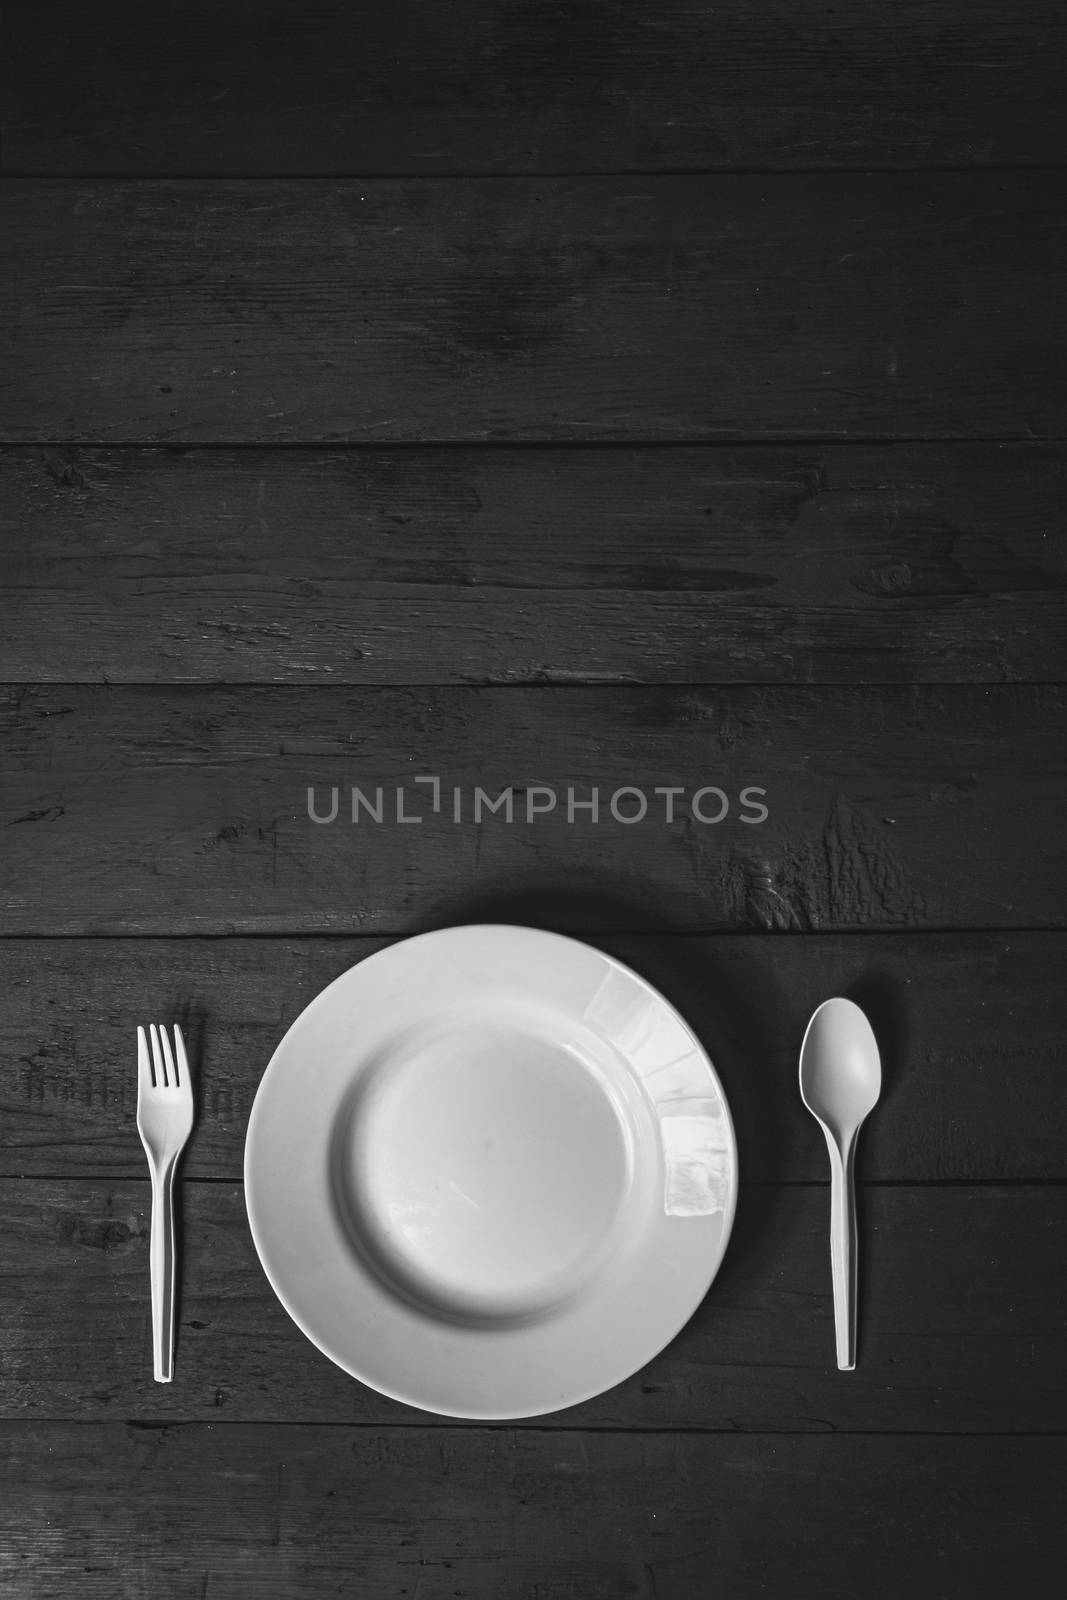 Empty white bowl, fork and spoon on black wood table, close-up view. Diet concept: flat lay of clean kitchen dishes on dark rustic background